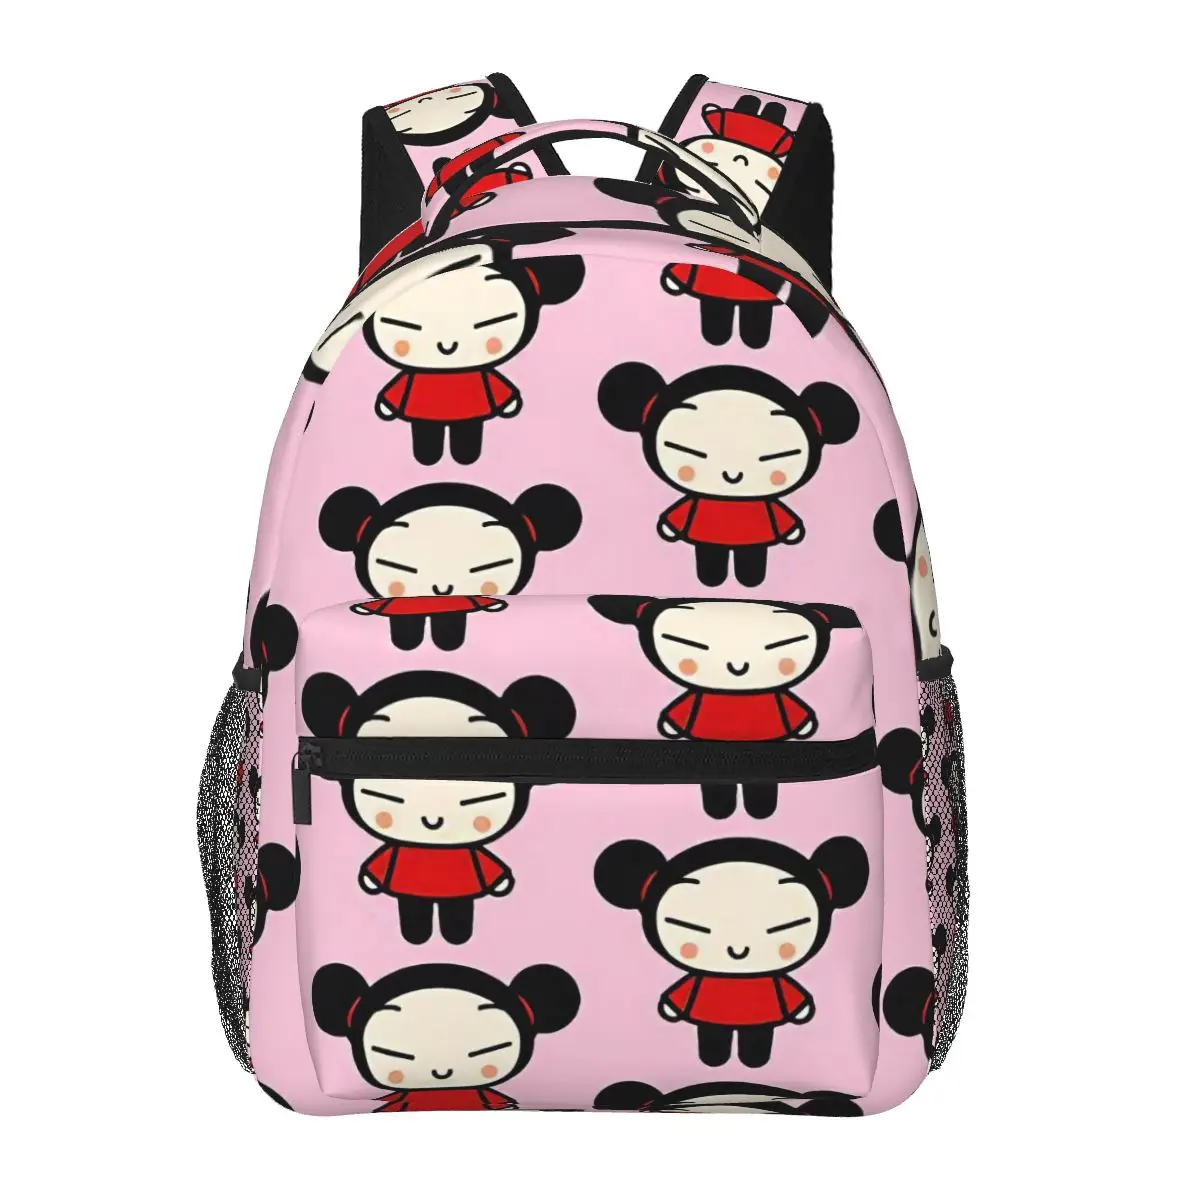 Authentic Pucca Bags | Shopee Philippines